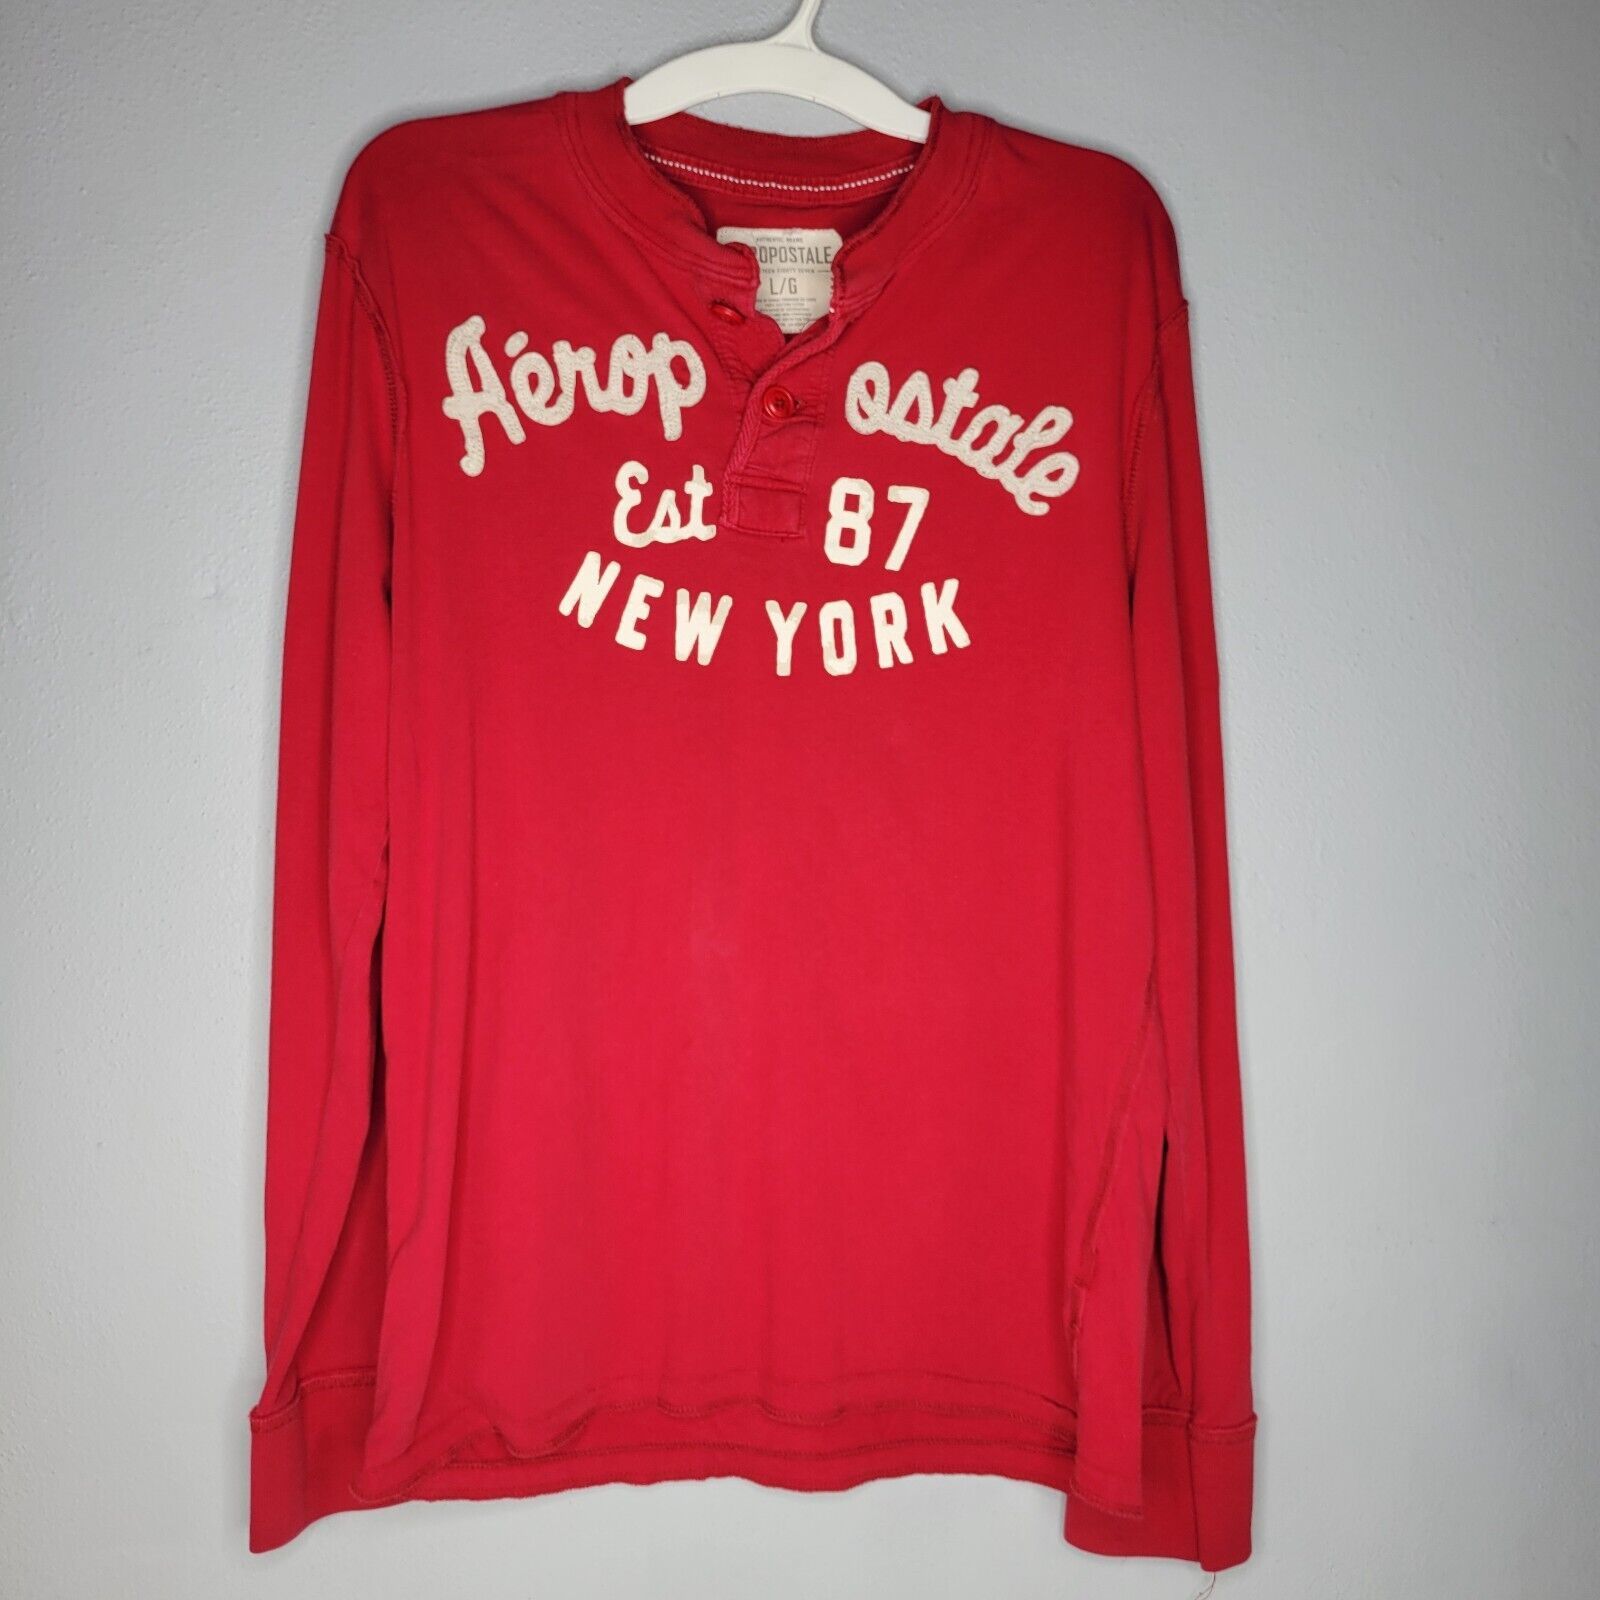 Aeropostale Mens Shirt Large Red New York Sweatshirt Long Sleeve Buttons Casual - $14.61